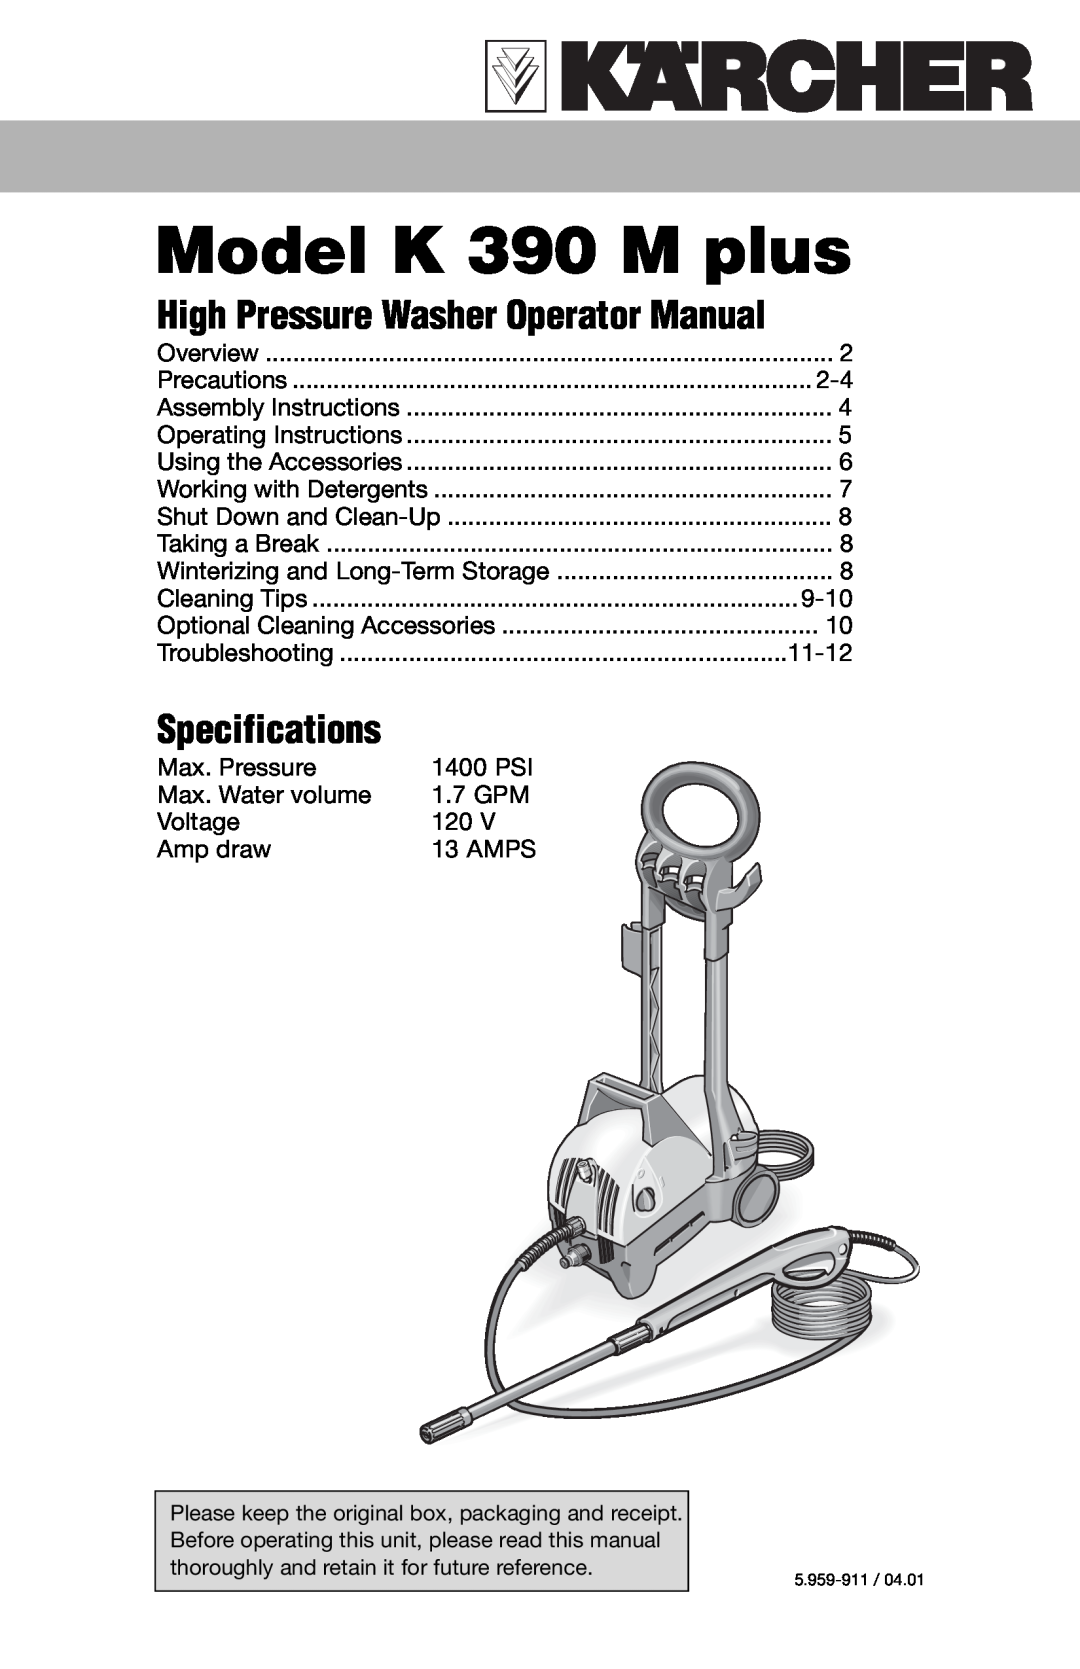 Karcher specifications High Pressure Washer Operator Manual, Model K 390 M plus, Specifications 